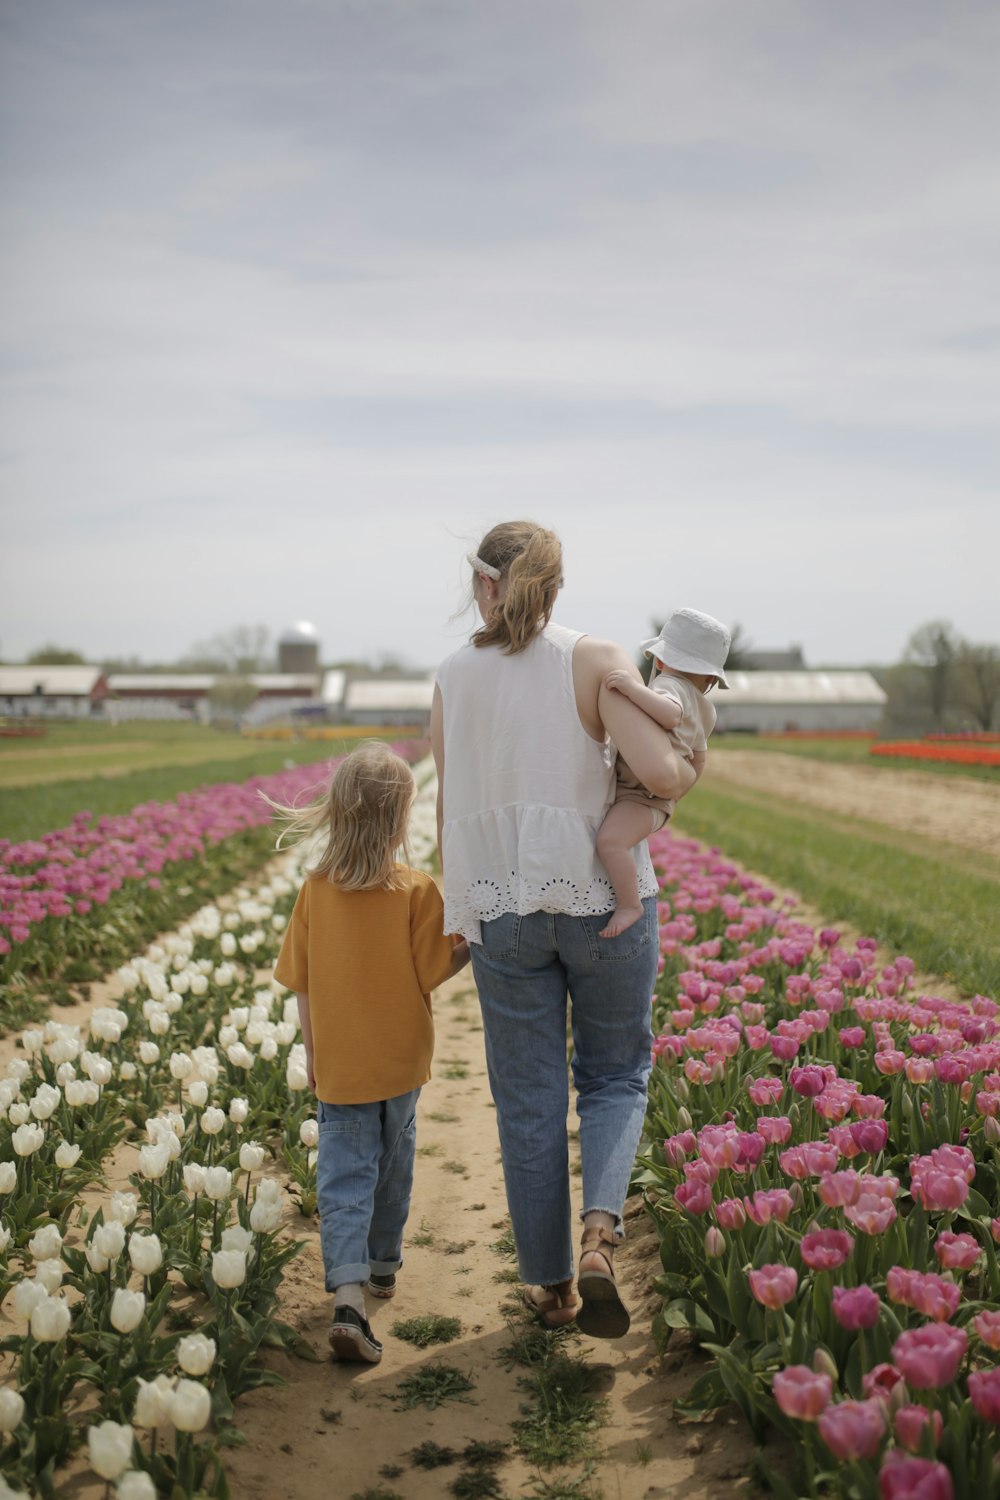 a woman and child walking through a field of flowers